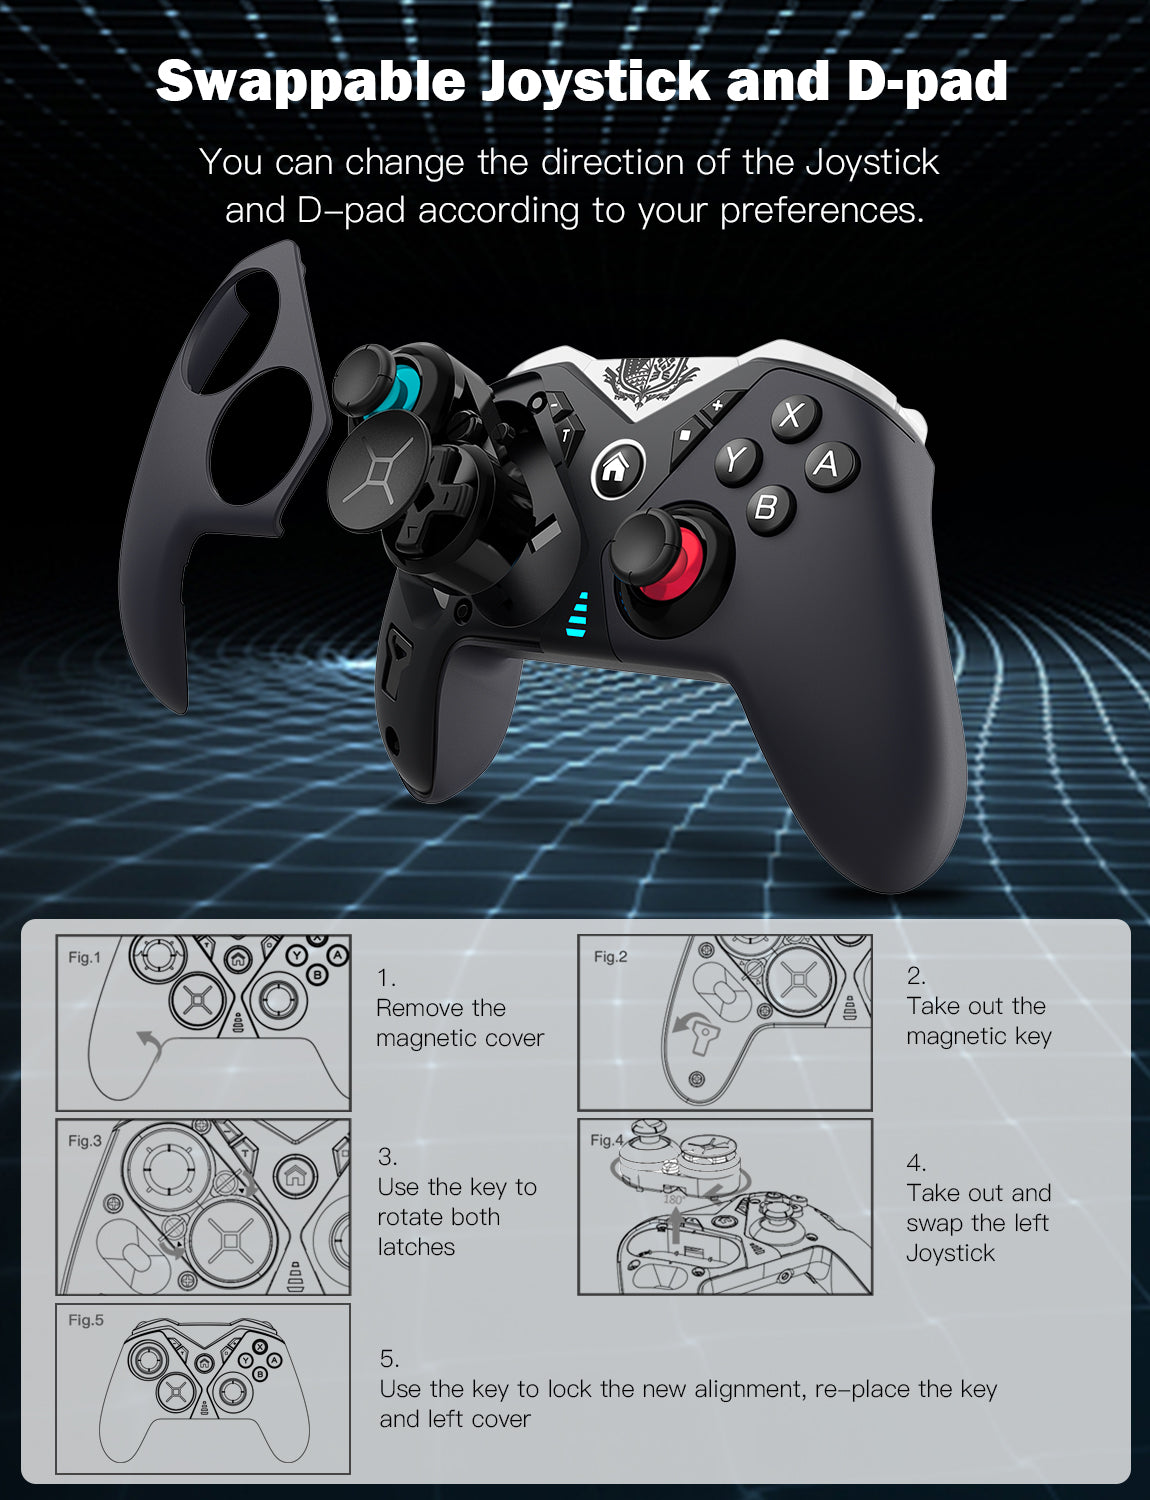 Pictures show the operating instructions on how to swap the D-pad with the left joystick as needed.